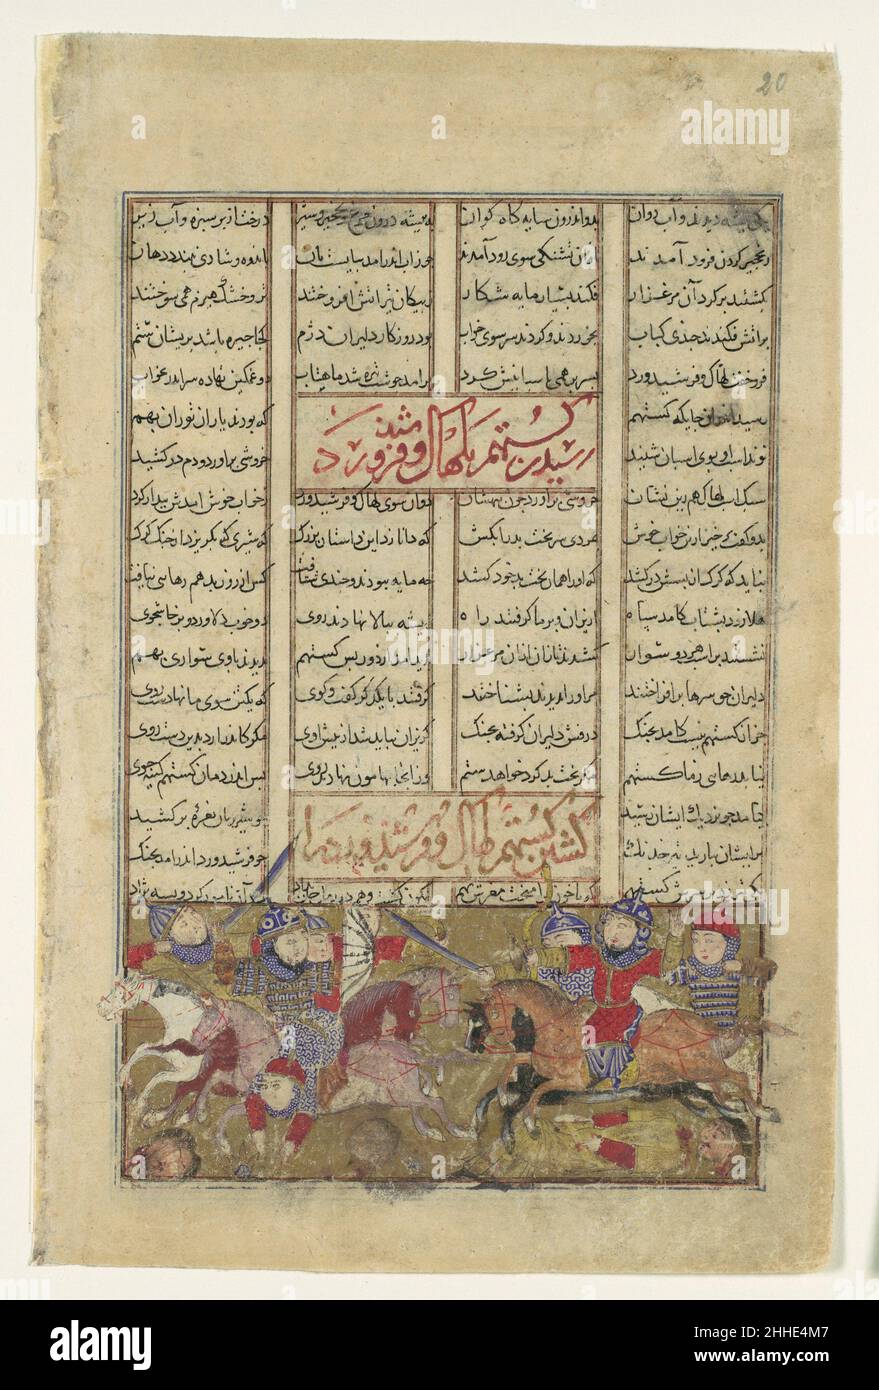 'Gustaham Slays Lahhak and Farshidvard', Folio from a Shahnama (Book of Kings) ca. 1330–40 Abu'l Qasim Firdausi Piran, the wise old commander-in-chief of the Turanians, was slain. He had advised his brothers that his army had been promised quarter in the event of his death but that the Turanian nobles would be in mortal danger. Therefore, the Turanian brothers Lahhak and Farshidvard fled toward Turan, pursued by the Iranian noble Gustaham. Farshidvard was killed by Gustaham's sword and Lahhak frenzied with grief, let loose his arrows. Both cavaliers were wounded, but Gustaham charged and cut o Stock Photo